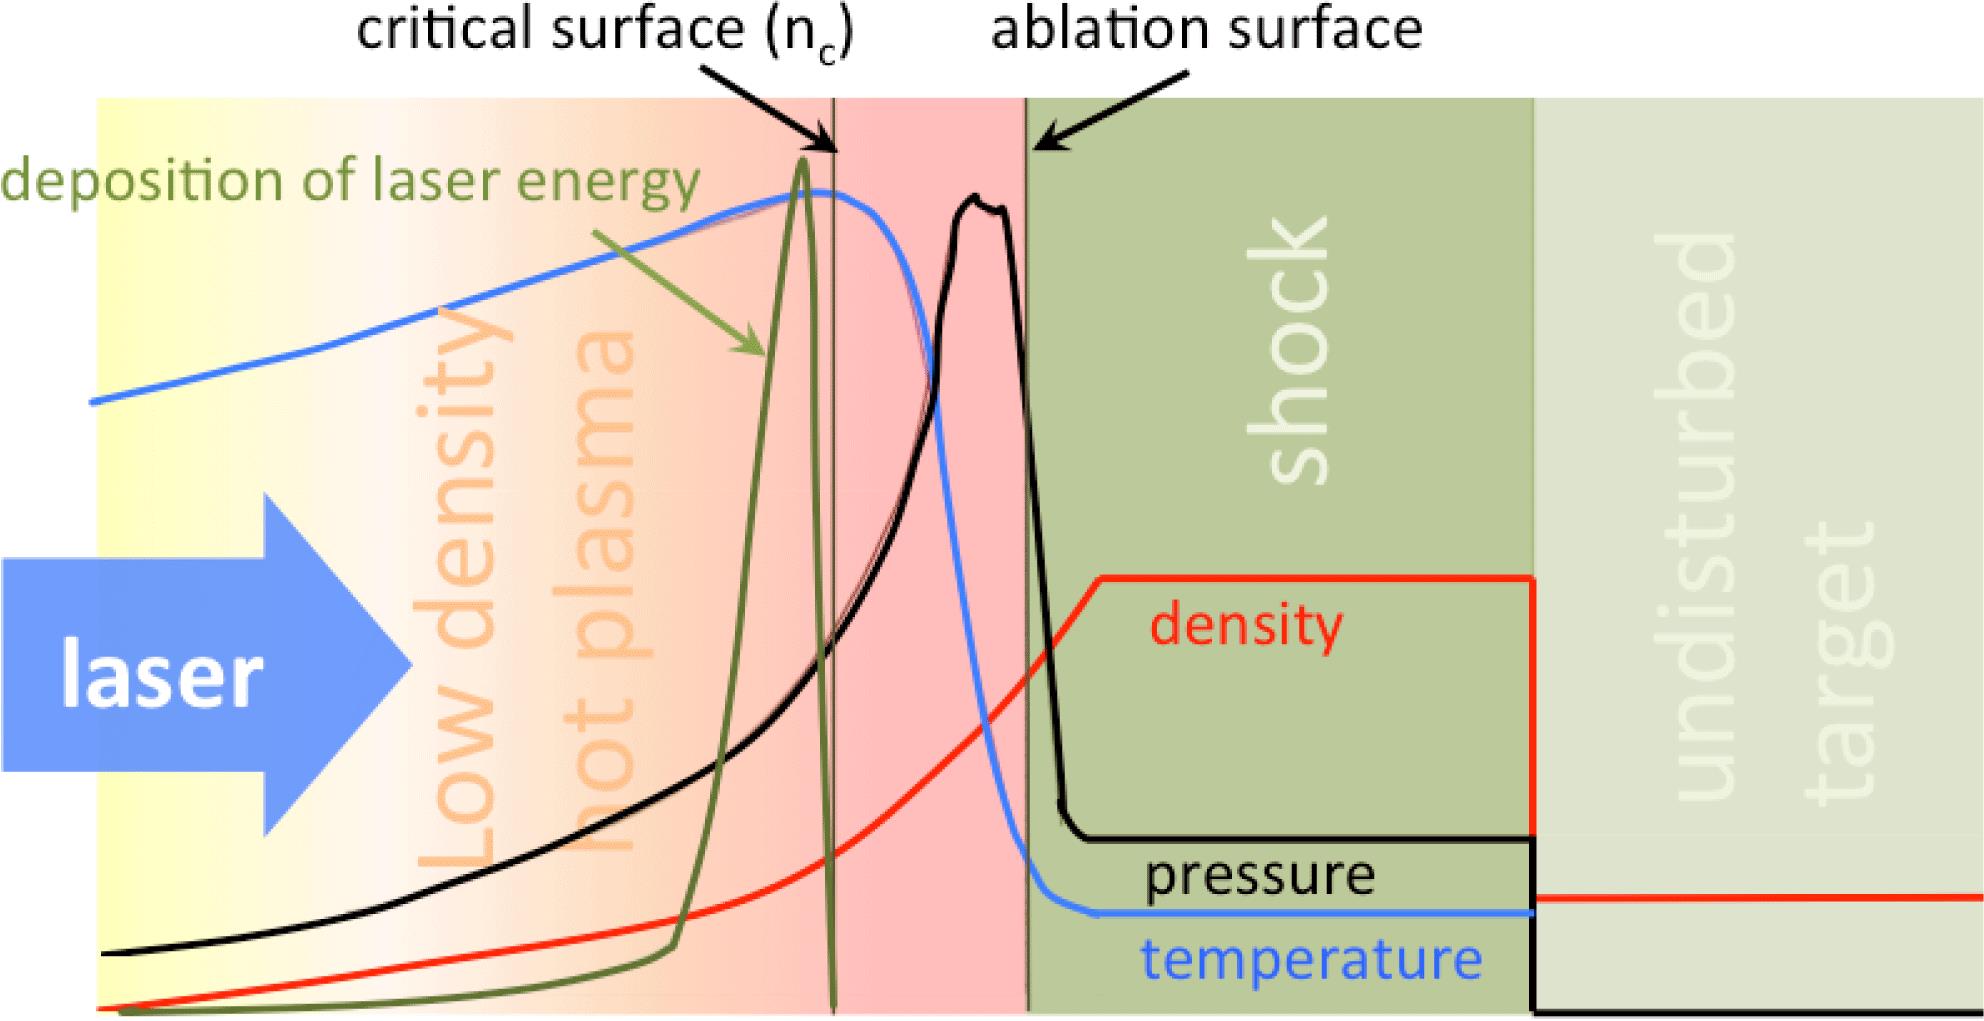 Diagram of interaction between a solid/liquid target and a laser showing ablation of the surface material. The laser light can only propagate through the plasma up to the critical density $n_{c}$ at the critical surface, where it is reflected. The highest temperature is found at the critical surface. The temperature then drops between the critical surface and the solid target. Heat from the critical surface is conducted down the temperature gradient towards the solid surface, where it generates more plasma, keeping the ablation process going. The cooling process due to the rapid expansion is balanced by laser energy deposition keeping the temperature of the low density corona roughly constant. The region between the ablation and critical surfaces is often referred to as conduction zone.